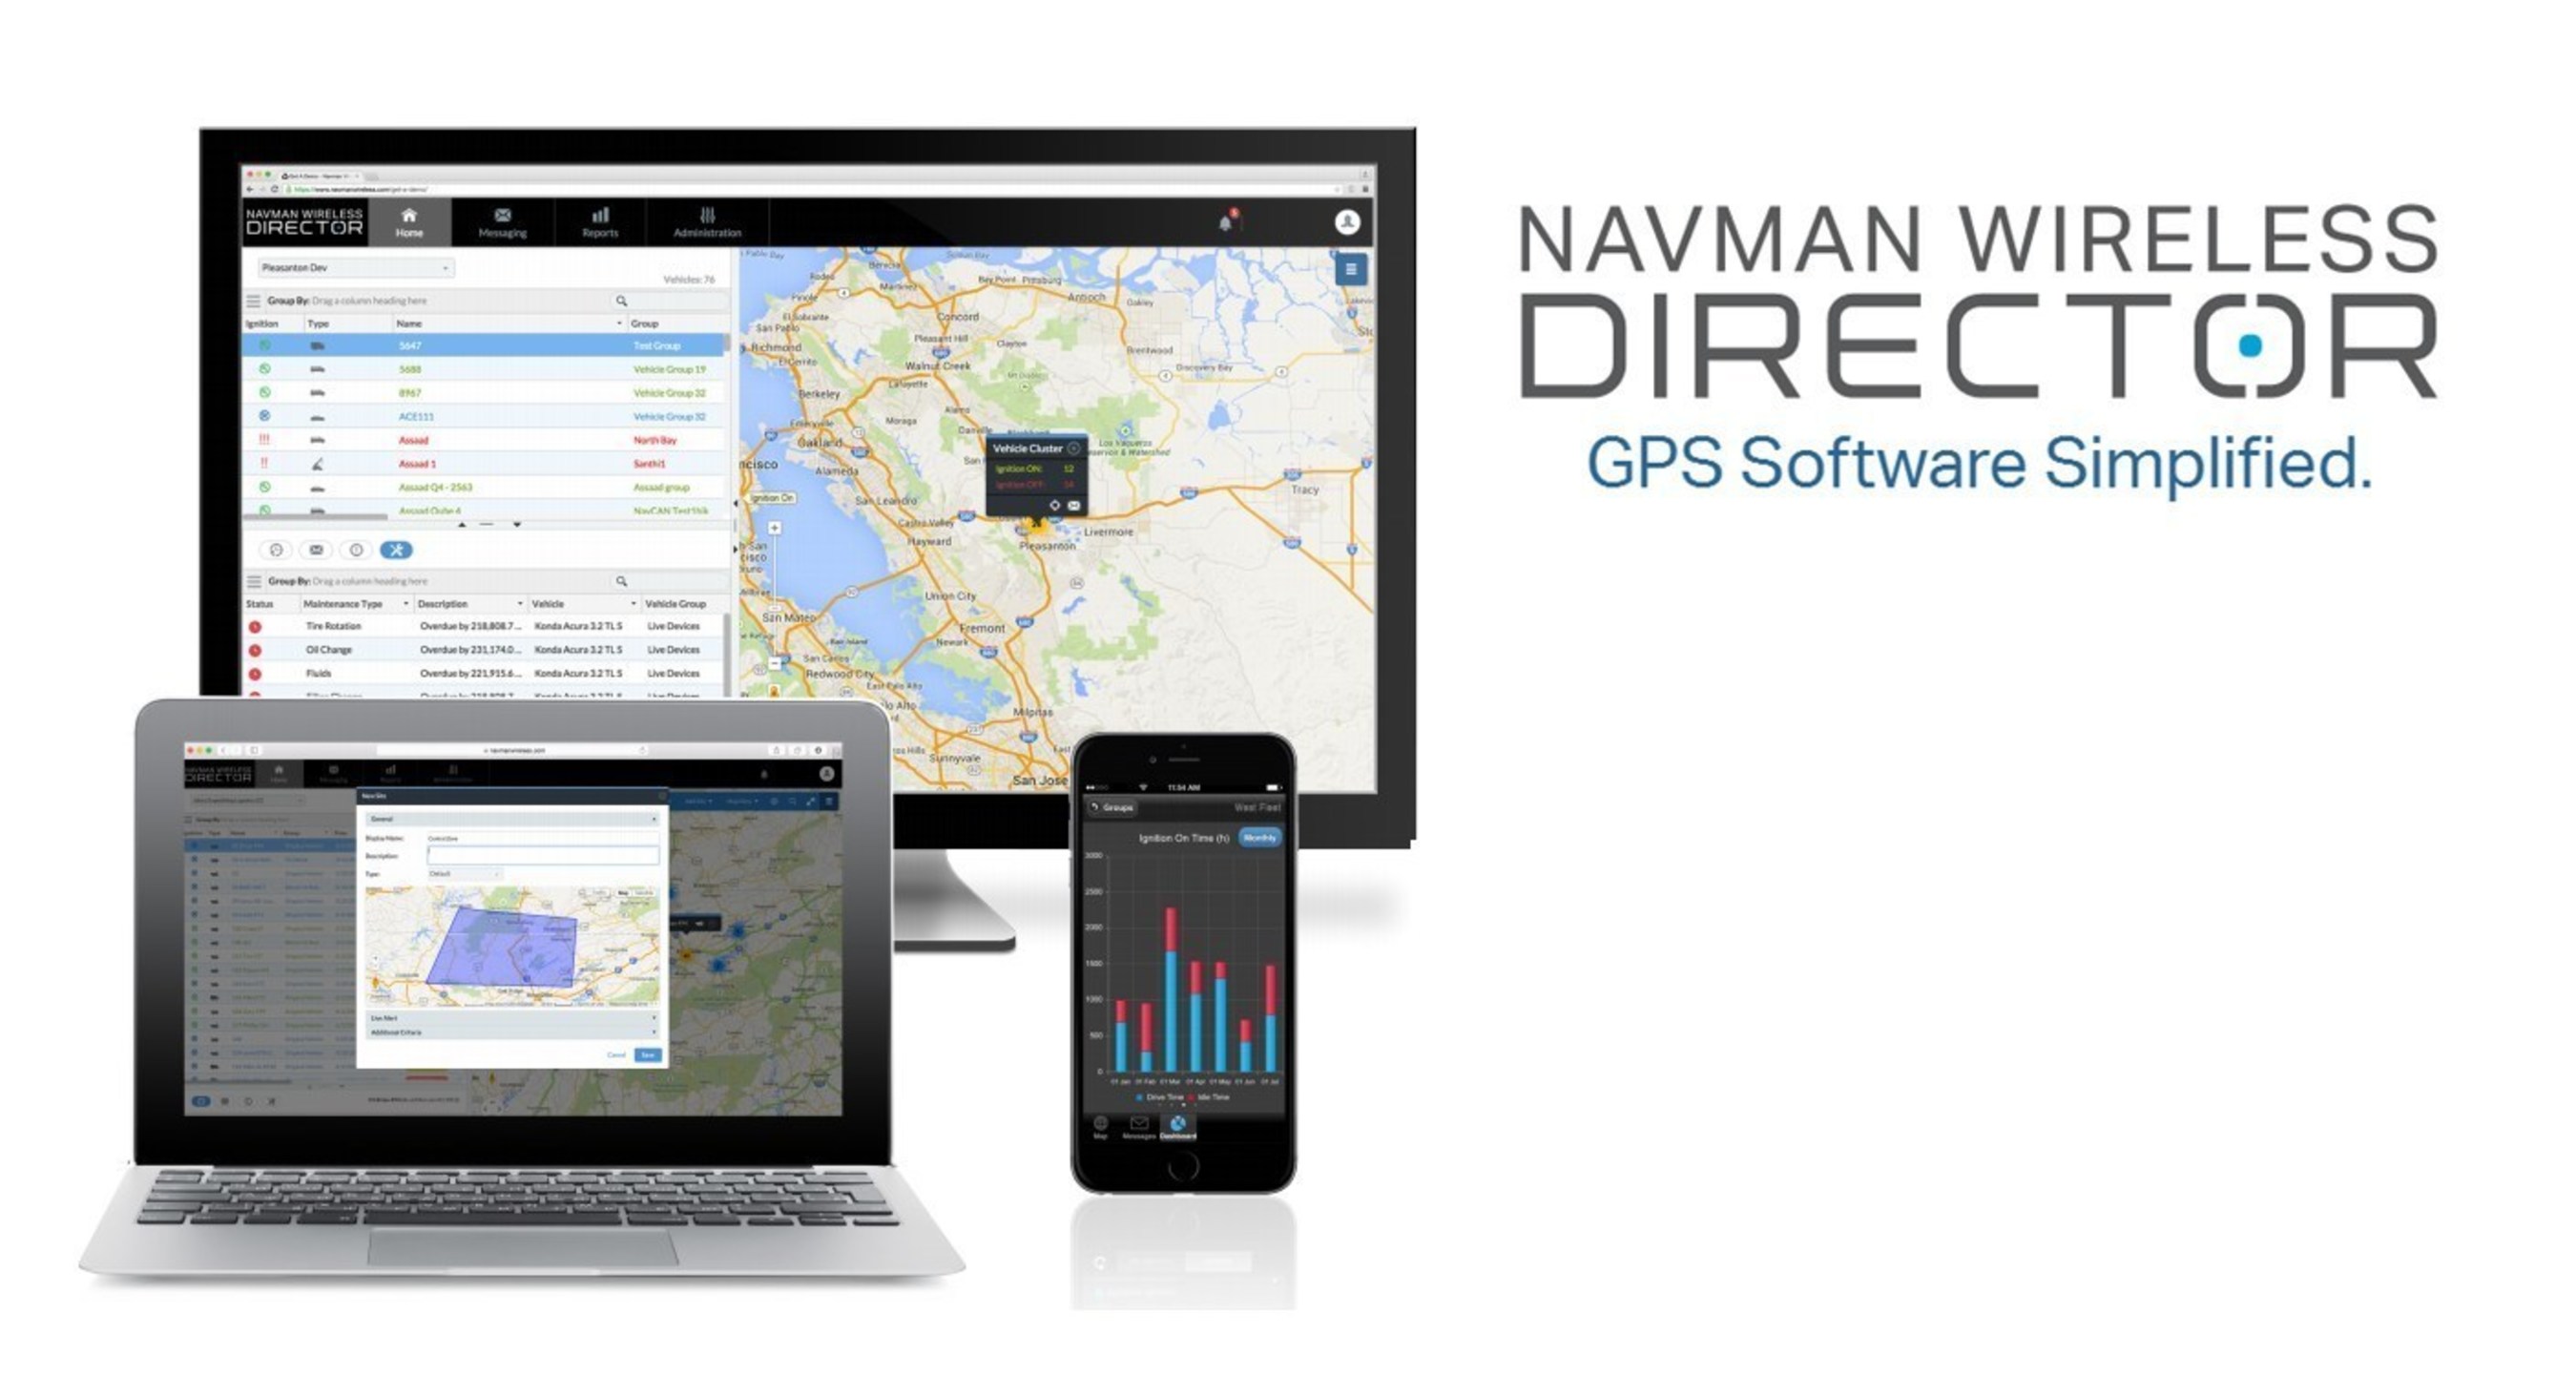 Navman Wireless DIRECTOR blends usability with data rich sophistication.